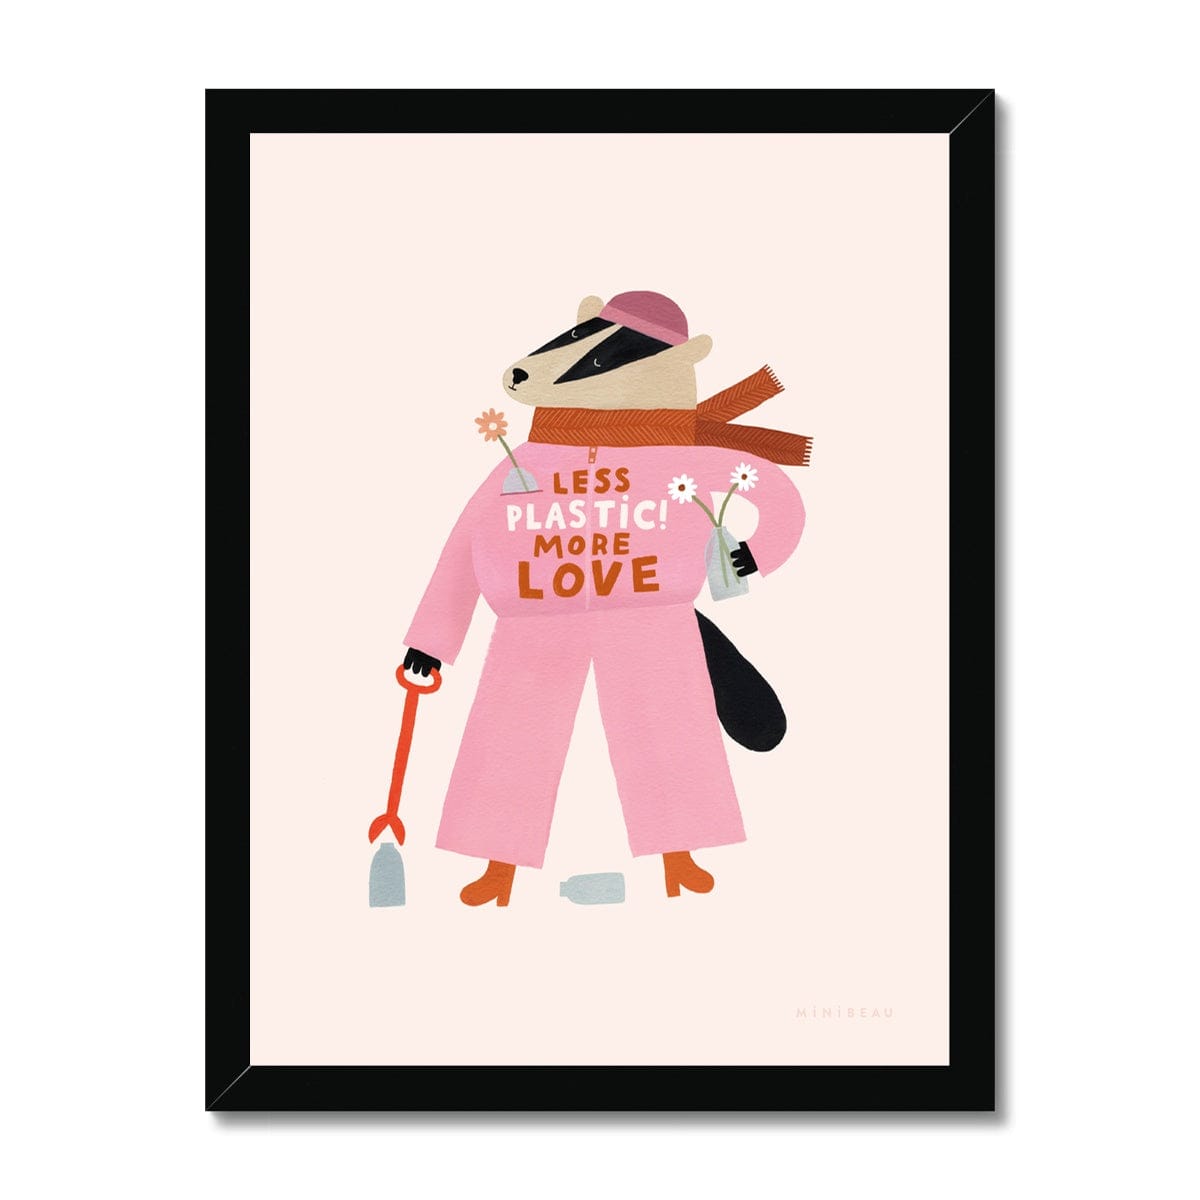 Art print in black frame. Our Less Plastic More Love Badger Art print features a badger standing tall, wearing pink, holding a litter picker and a black bagand picking up plastic bottles. It's jumper says LESS PLASTIC MORE LOVE in white and red.